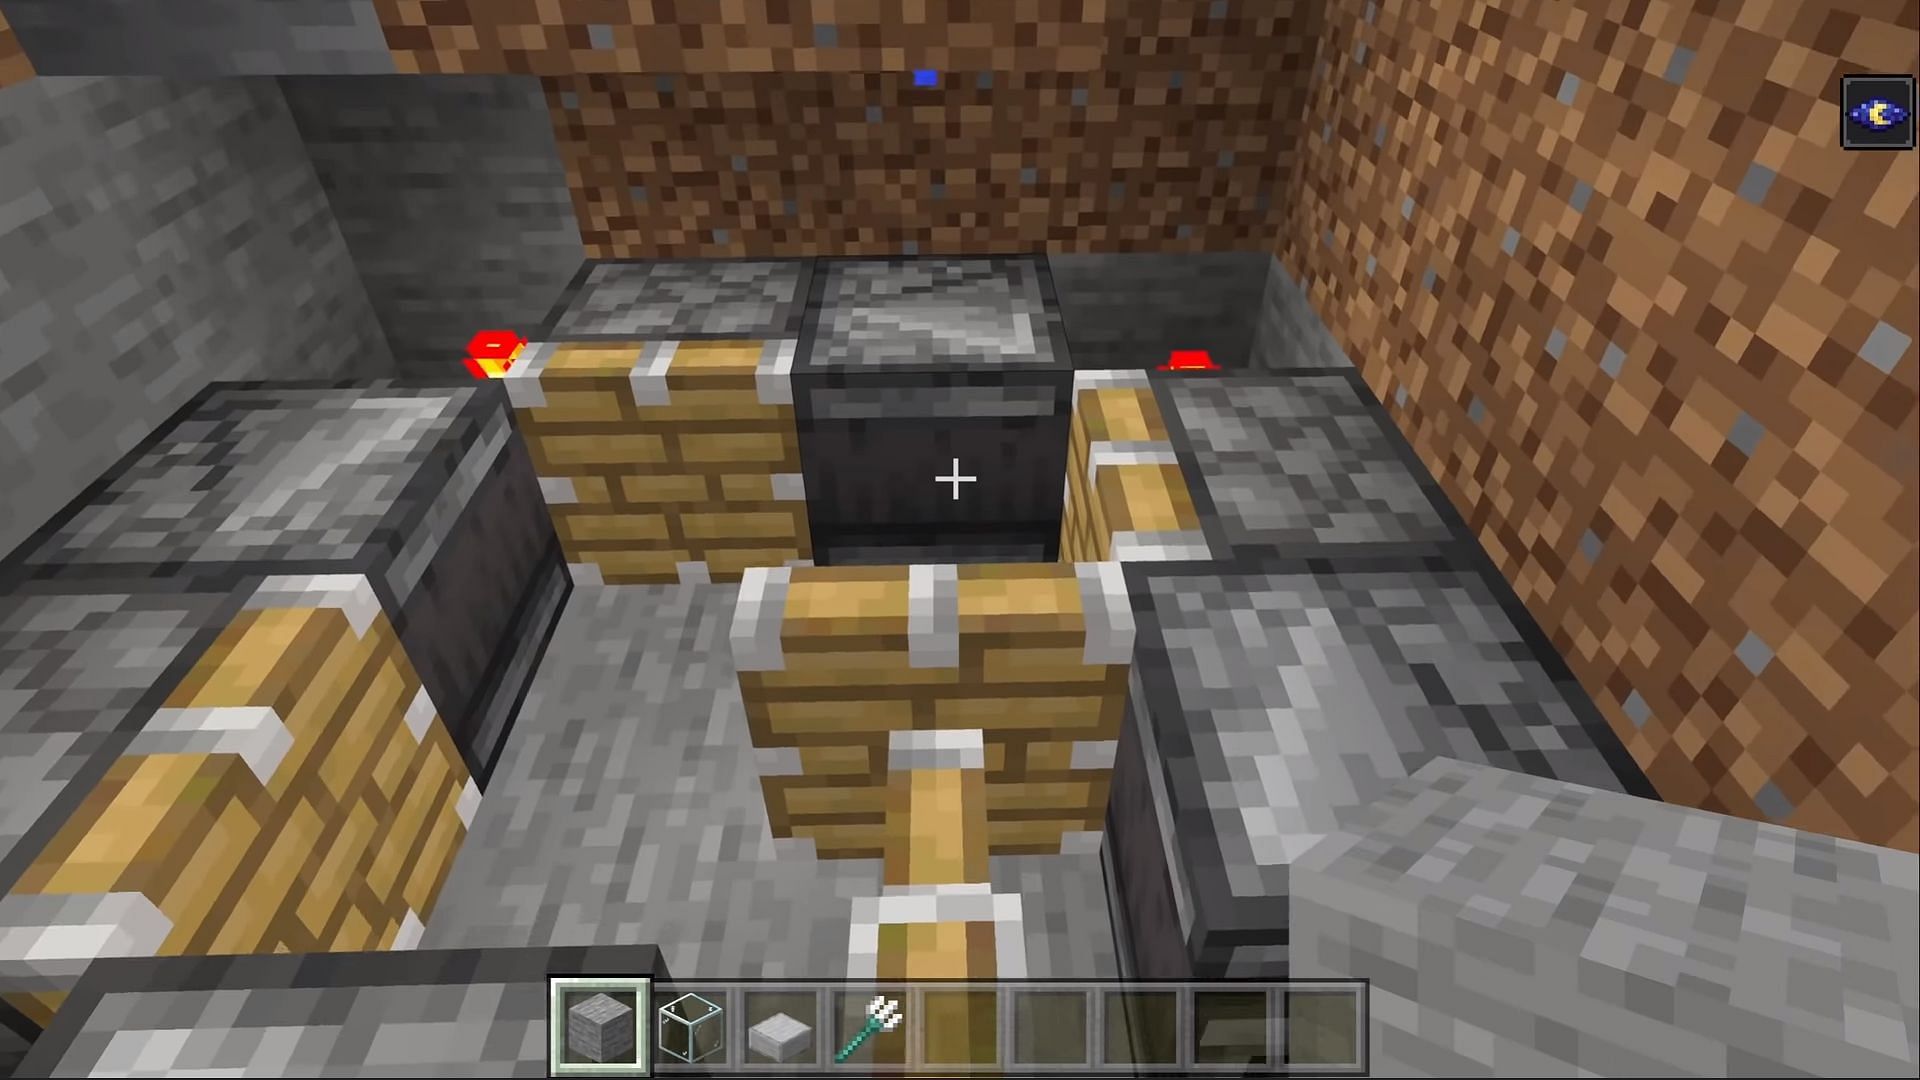 Redstone clock activating the pistons at periodic intervals (Image via Noise Gaming YouTube)